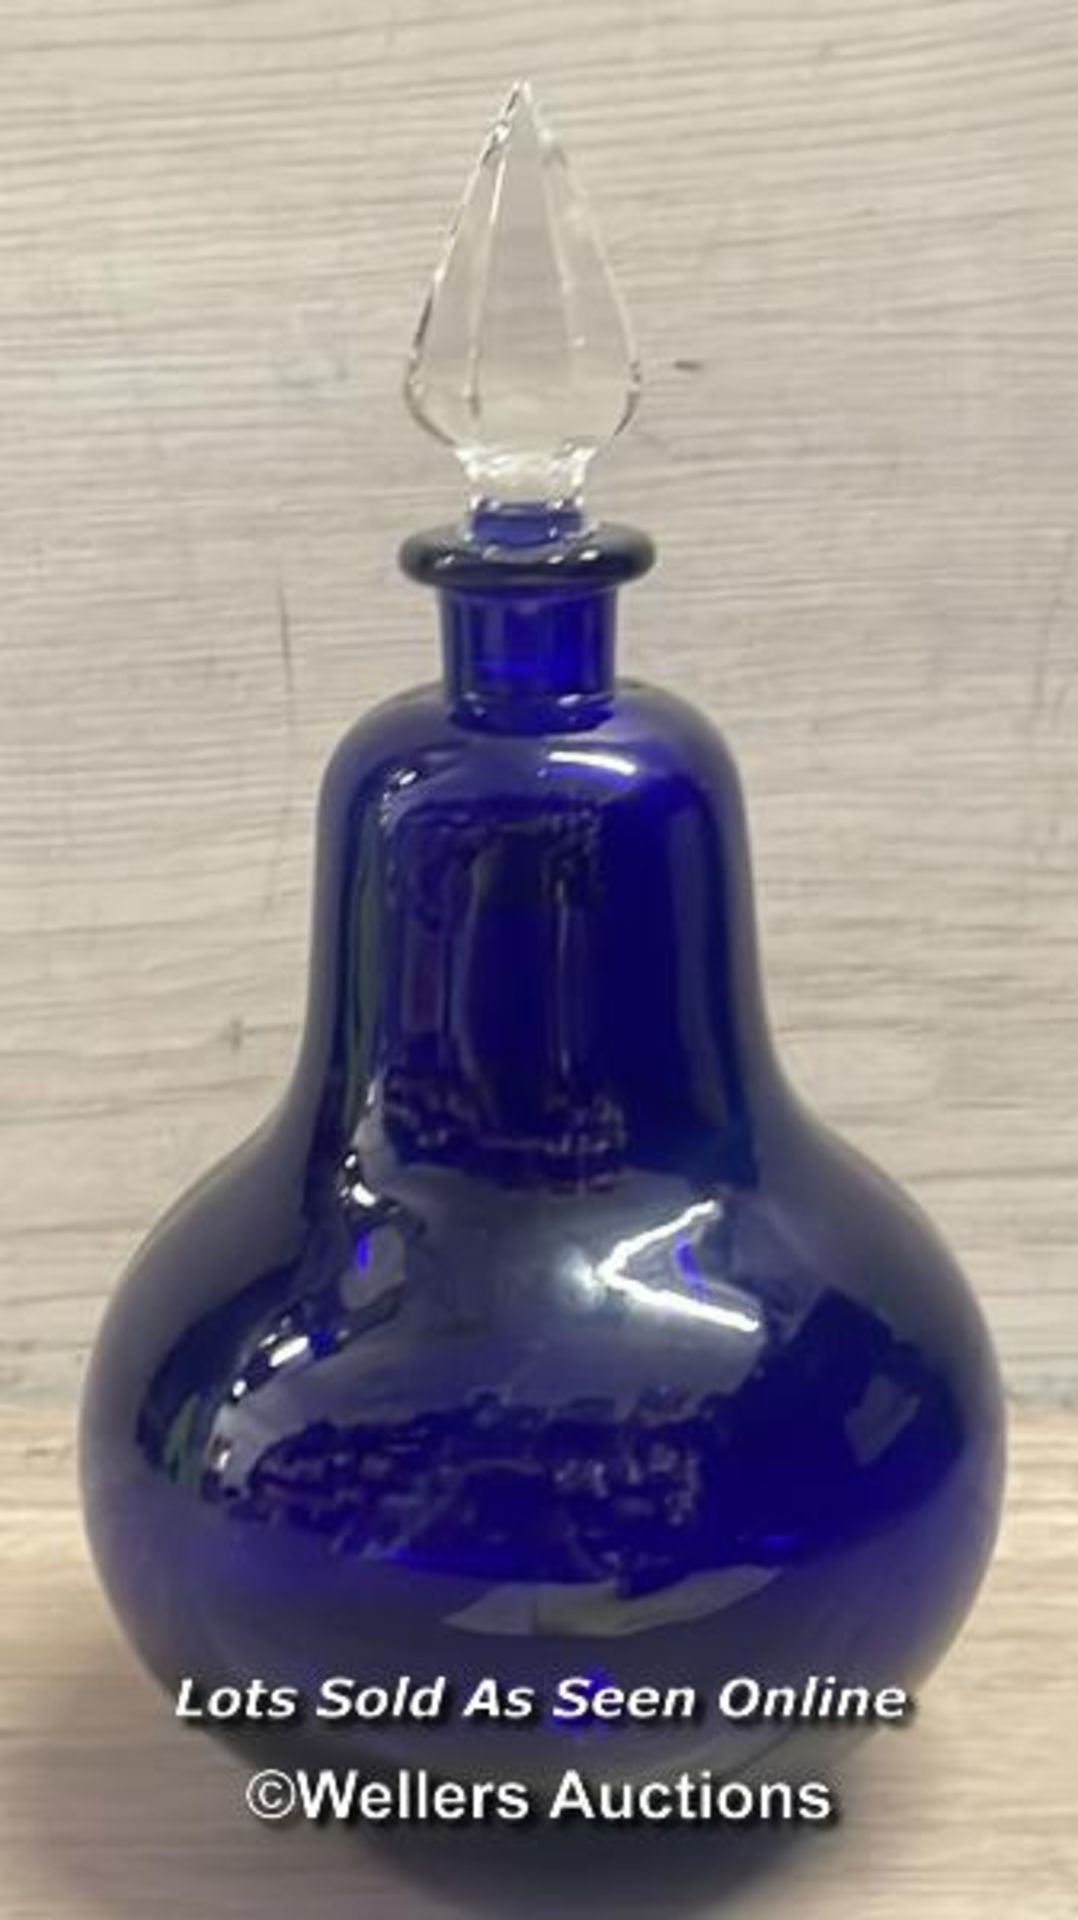 A RARE ROYAL PHARMACEUTICAL SOCIETY APOTHECARY BOTTLE, C1960'S, IN BLUE GLASS WITH GOLD LEAF LABEL - Image 6 of 6